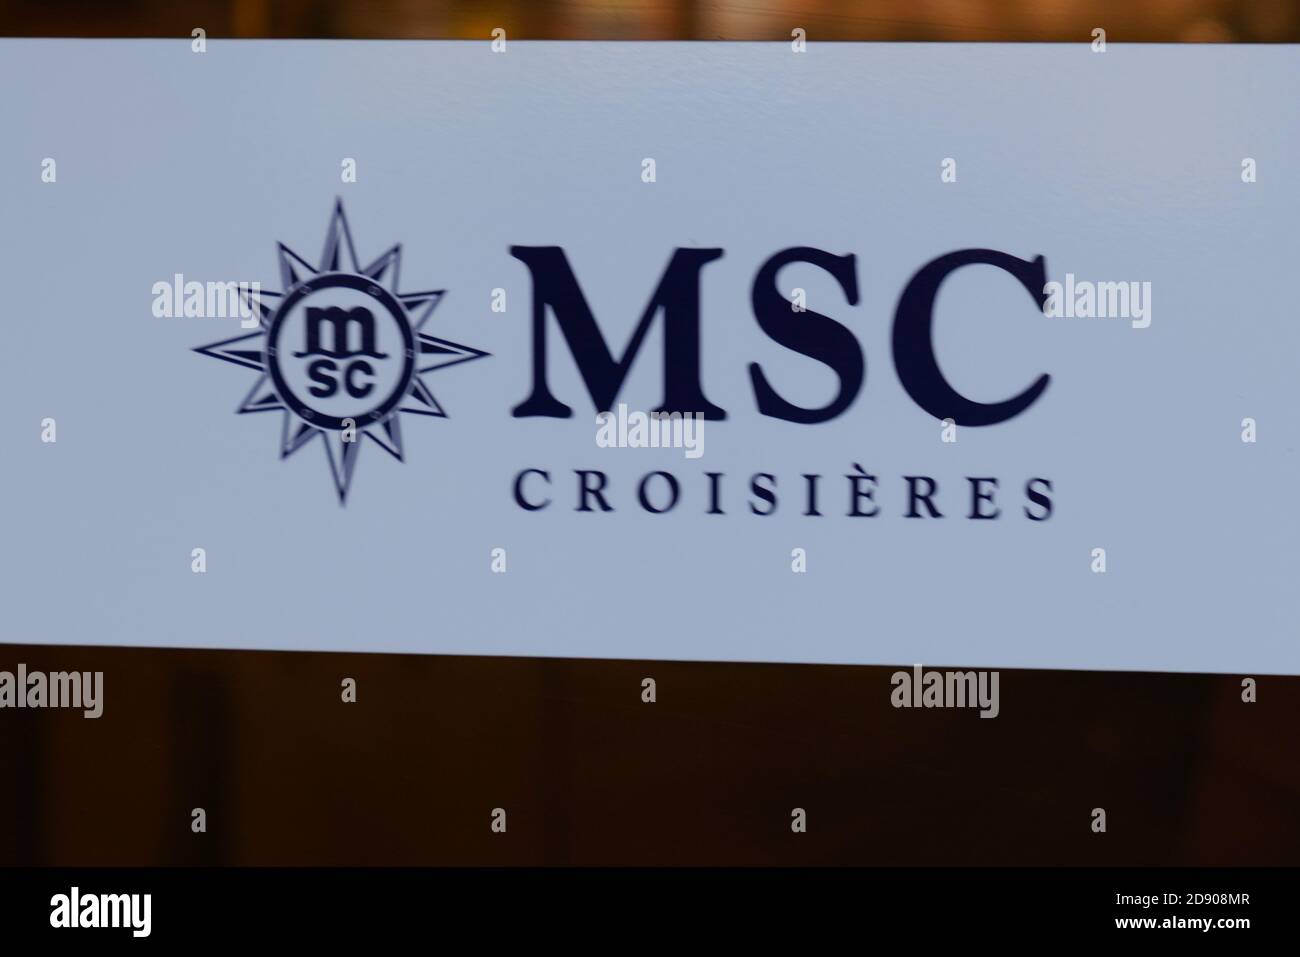 Bordeaux , Aquitaine / France - 10 30 2020 : Msc Croisieres text sign and logo on panel front of travel agency Stock Photo